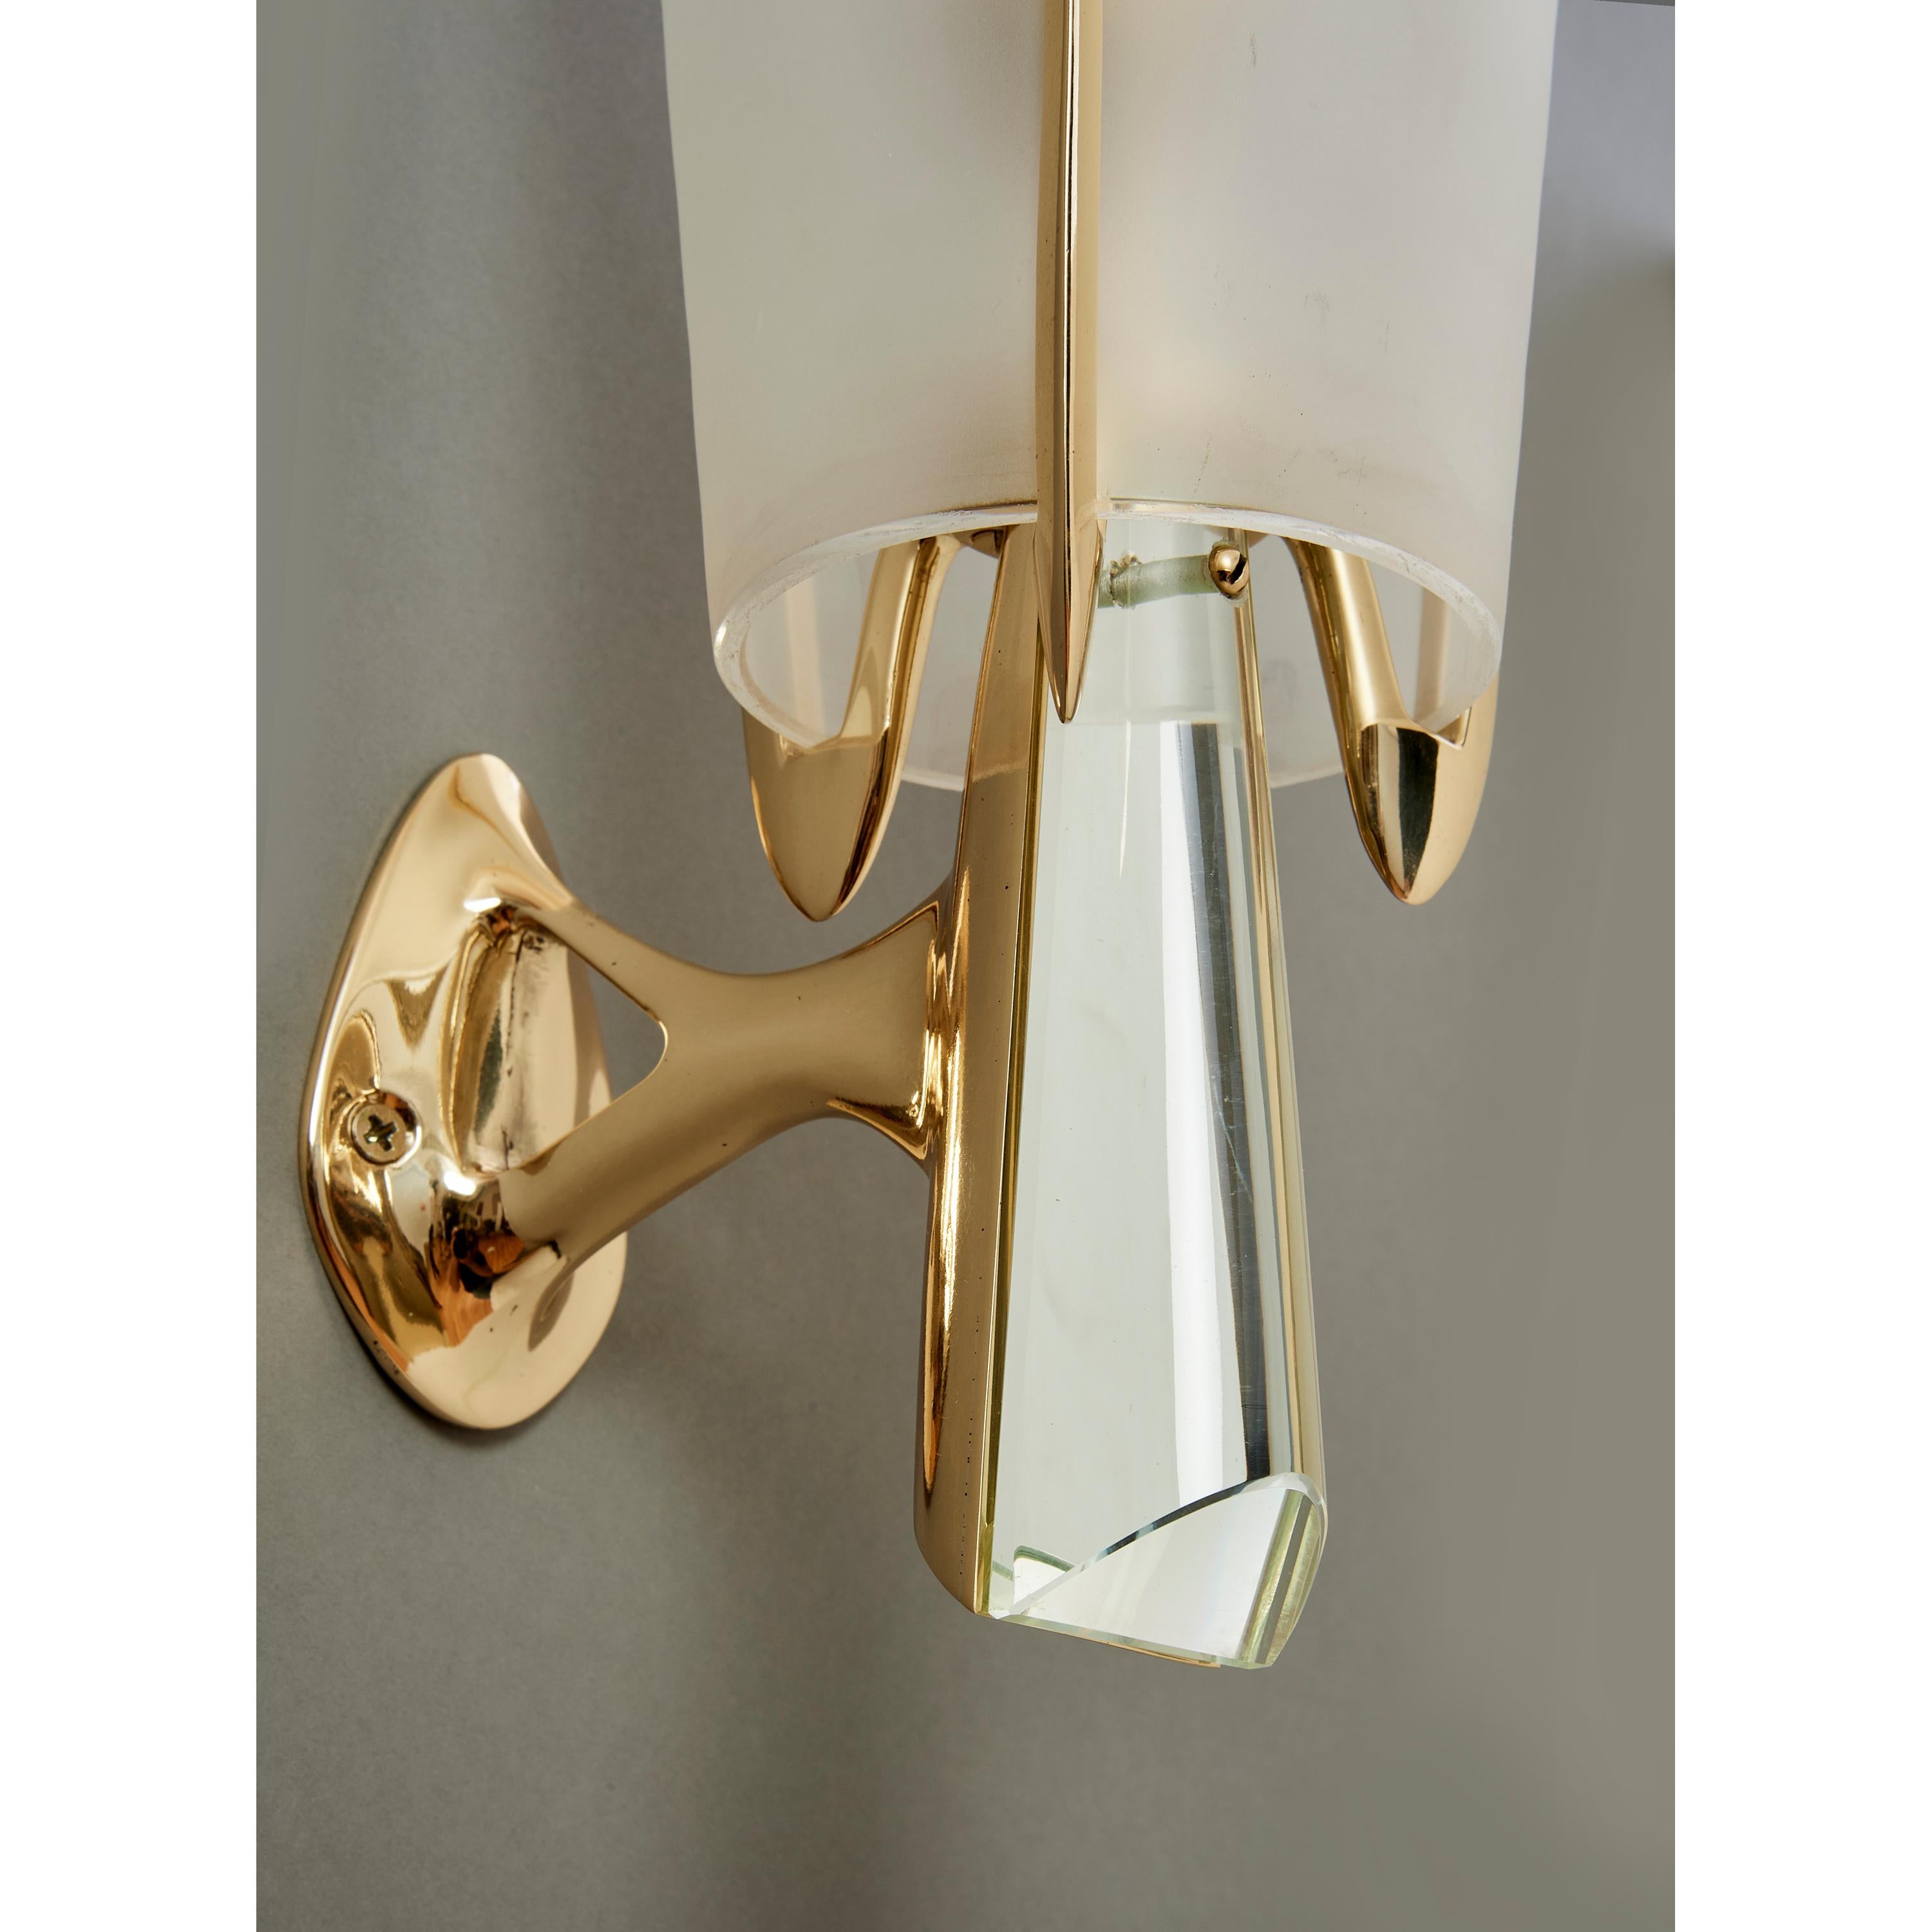 Max Ingrand for Fontana Arte: Rare Sconces in Brass and Crystal, Italy 1955 For Sale 7